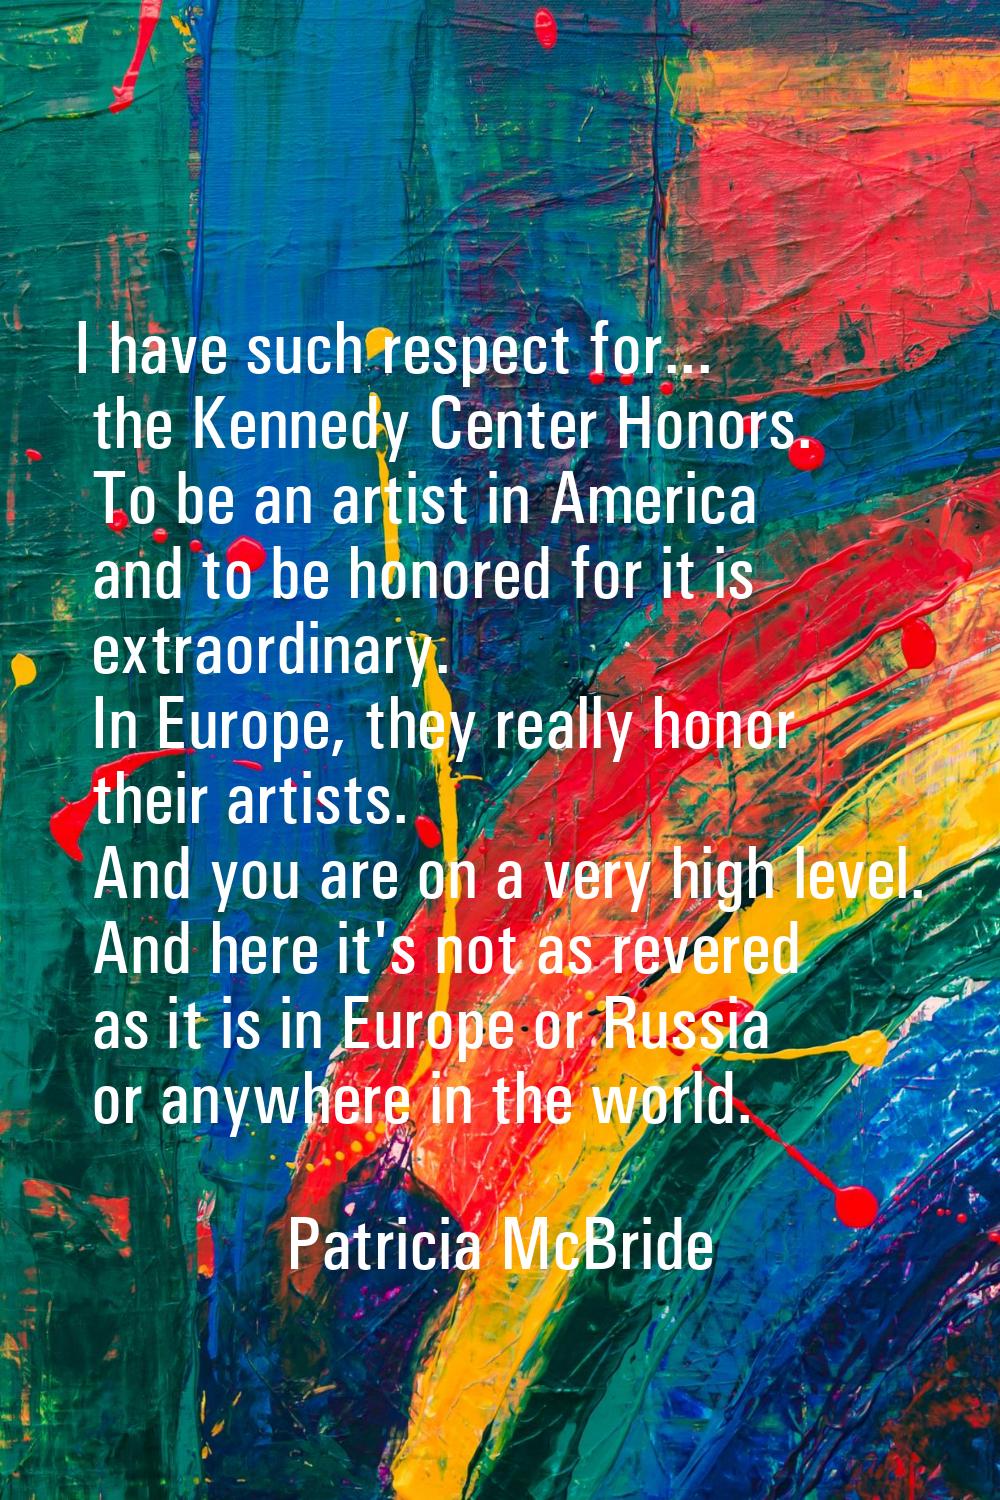 I have such respect for... the Kennedy Center Honors. To be an artist in America and to be honored 